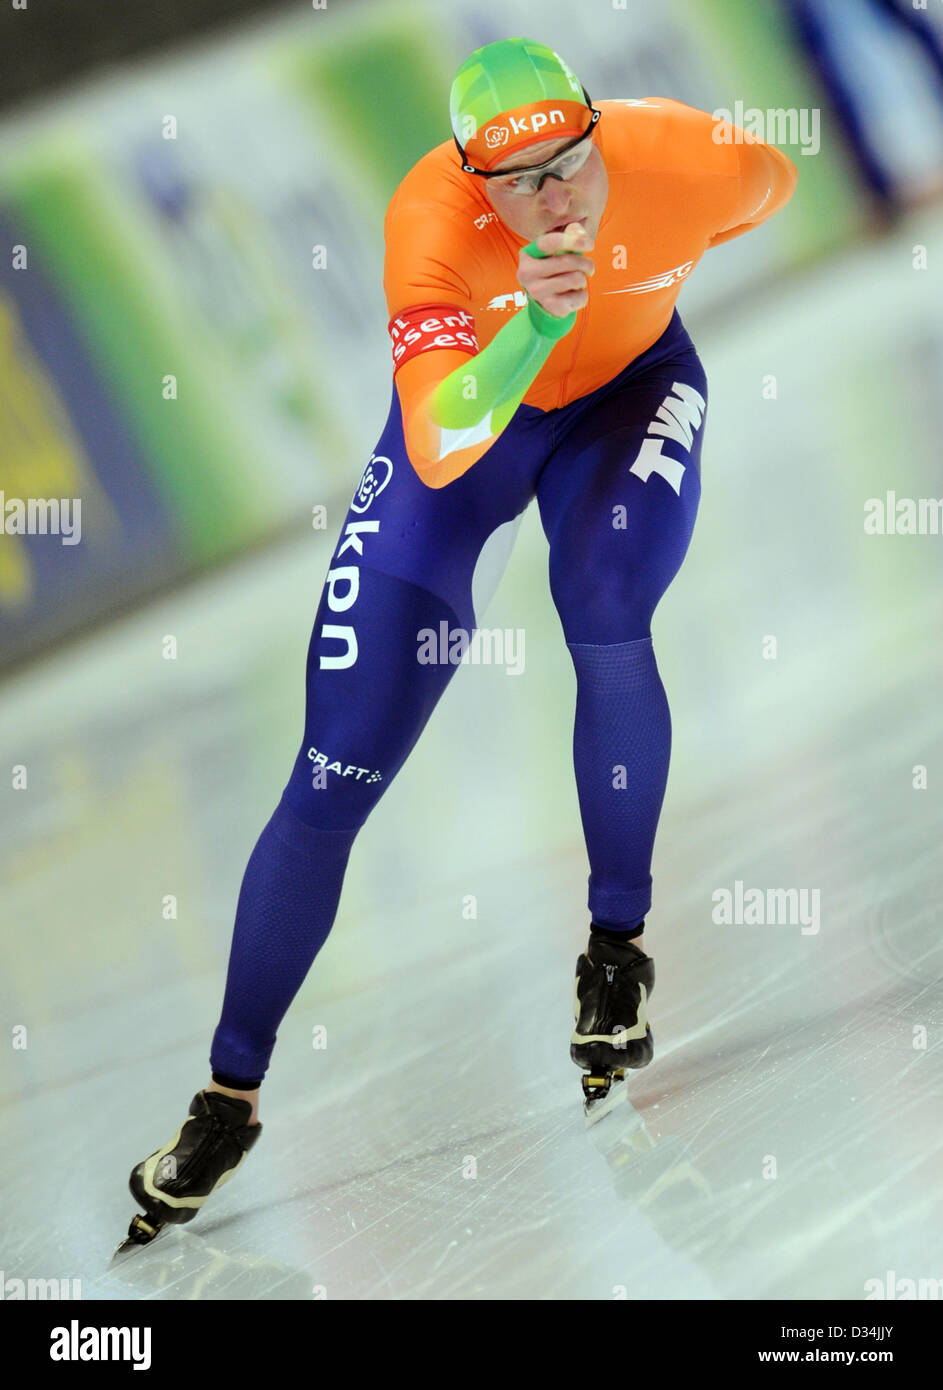 Inzell, Germany. 9th February 2013. Dutch speed skater Sven Kramer competes in the men's 5000m race of the Speed Skating World Cup at Max-Aicher-Arena in Inzell, Germany, 09 February 2013. Kramer won the race. Photo: TOBIAS HASE/dpa/Alamy Live News Stock Photo